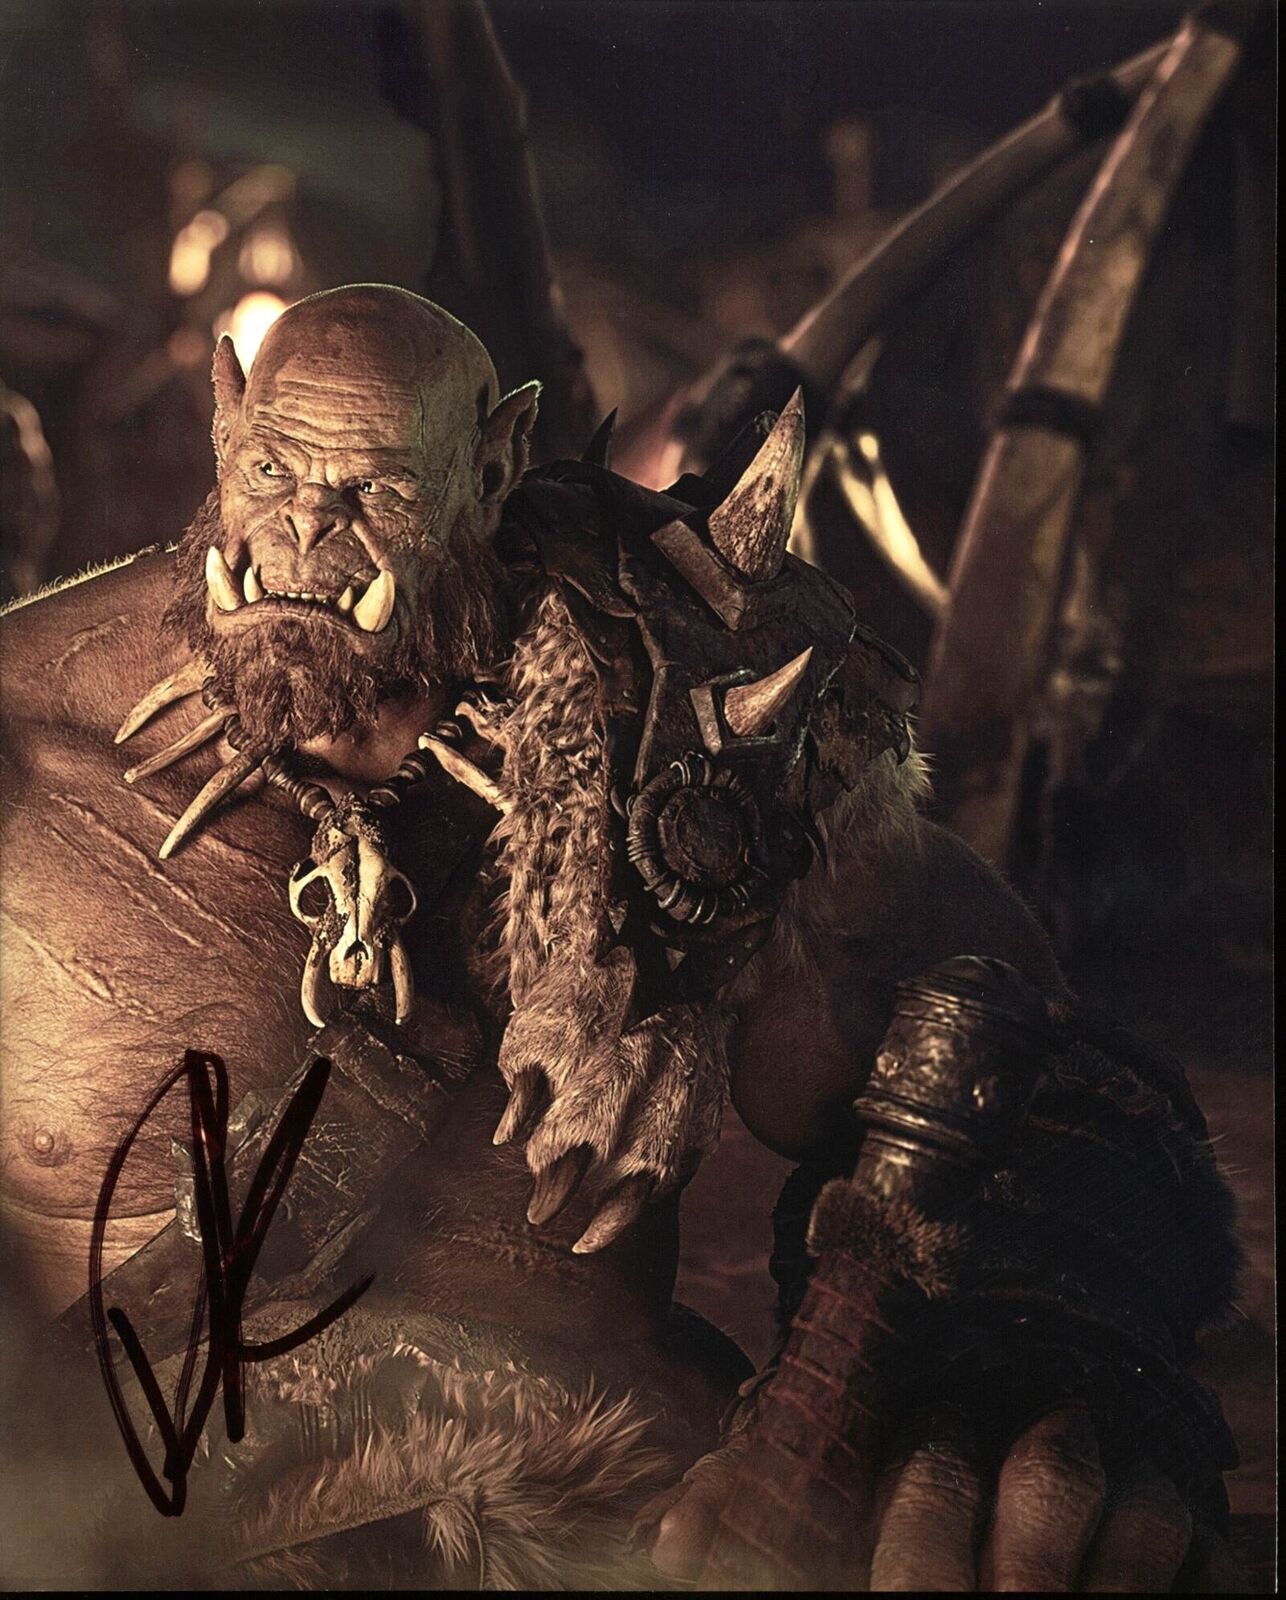 Rob Kazinsky Warcraft Authentic Signed 8X10 Photo Poster painting Autographed PSA/DNA #AB83422